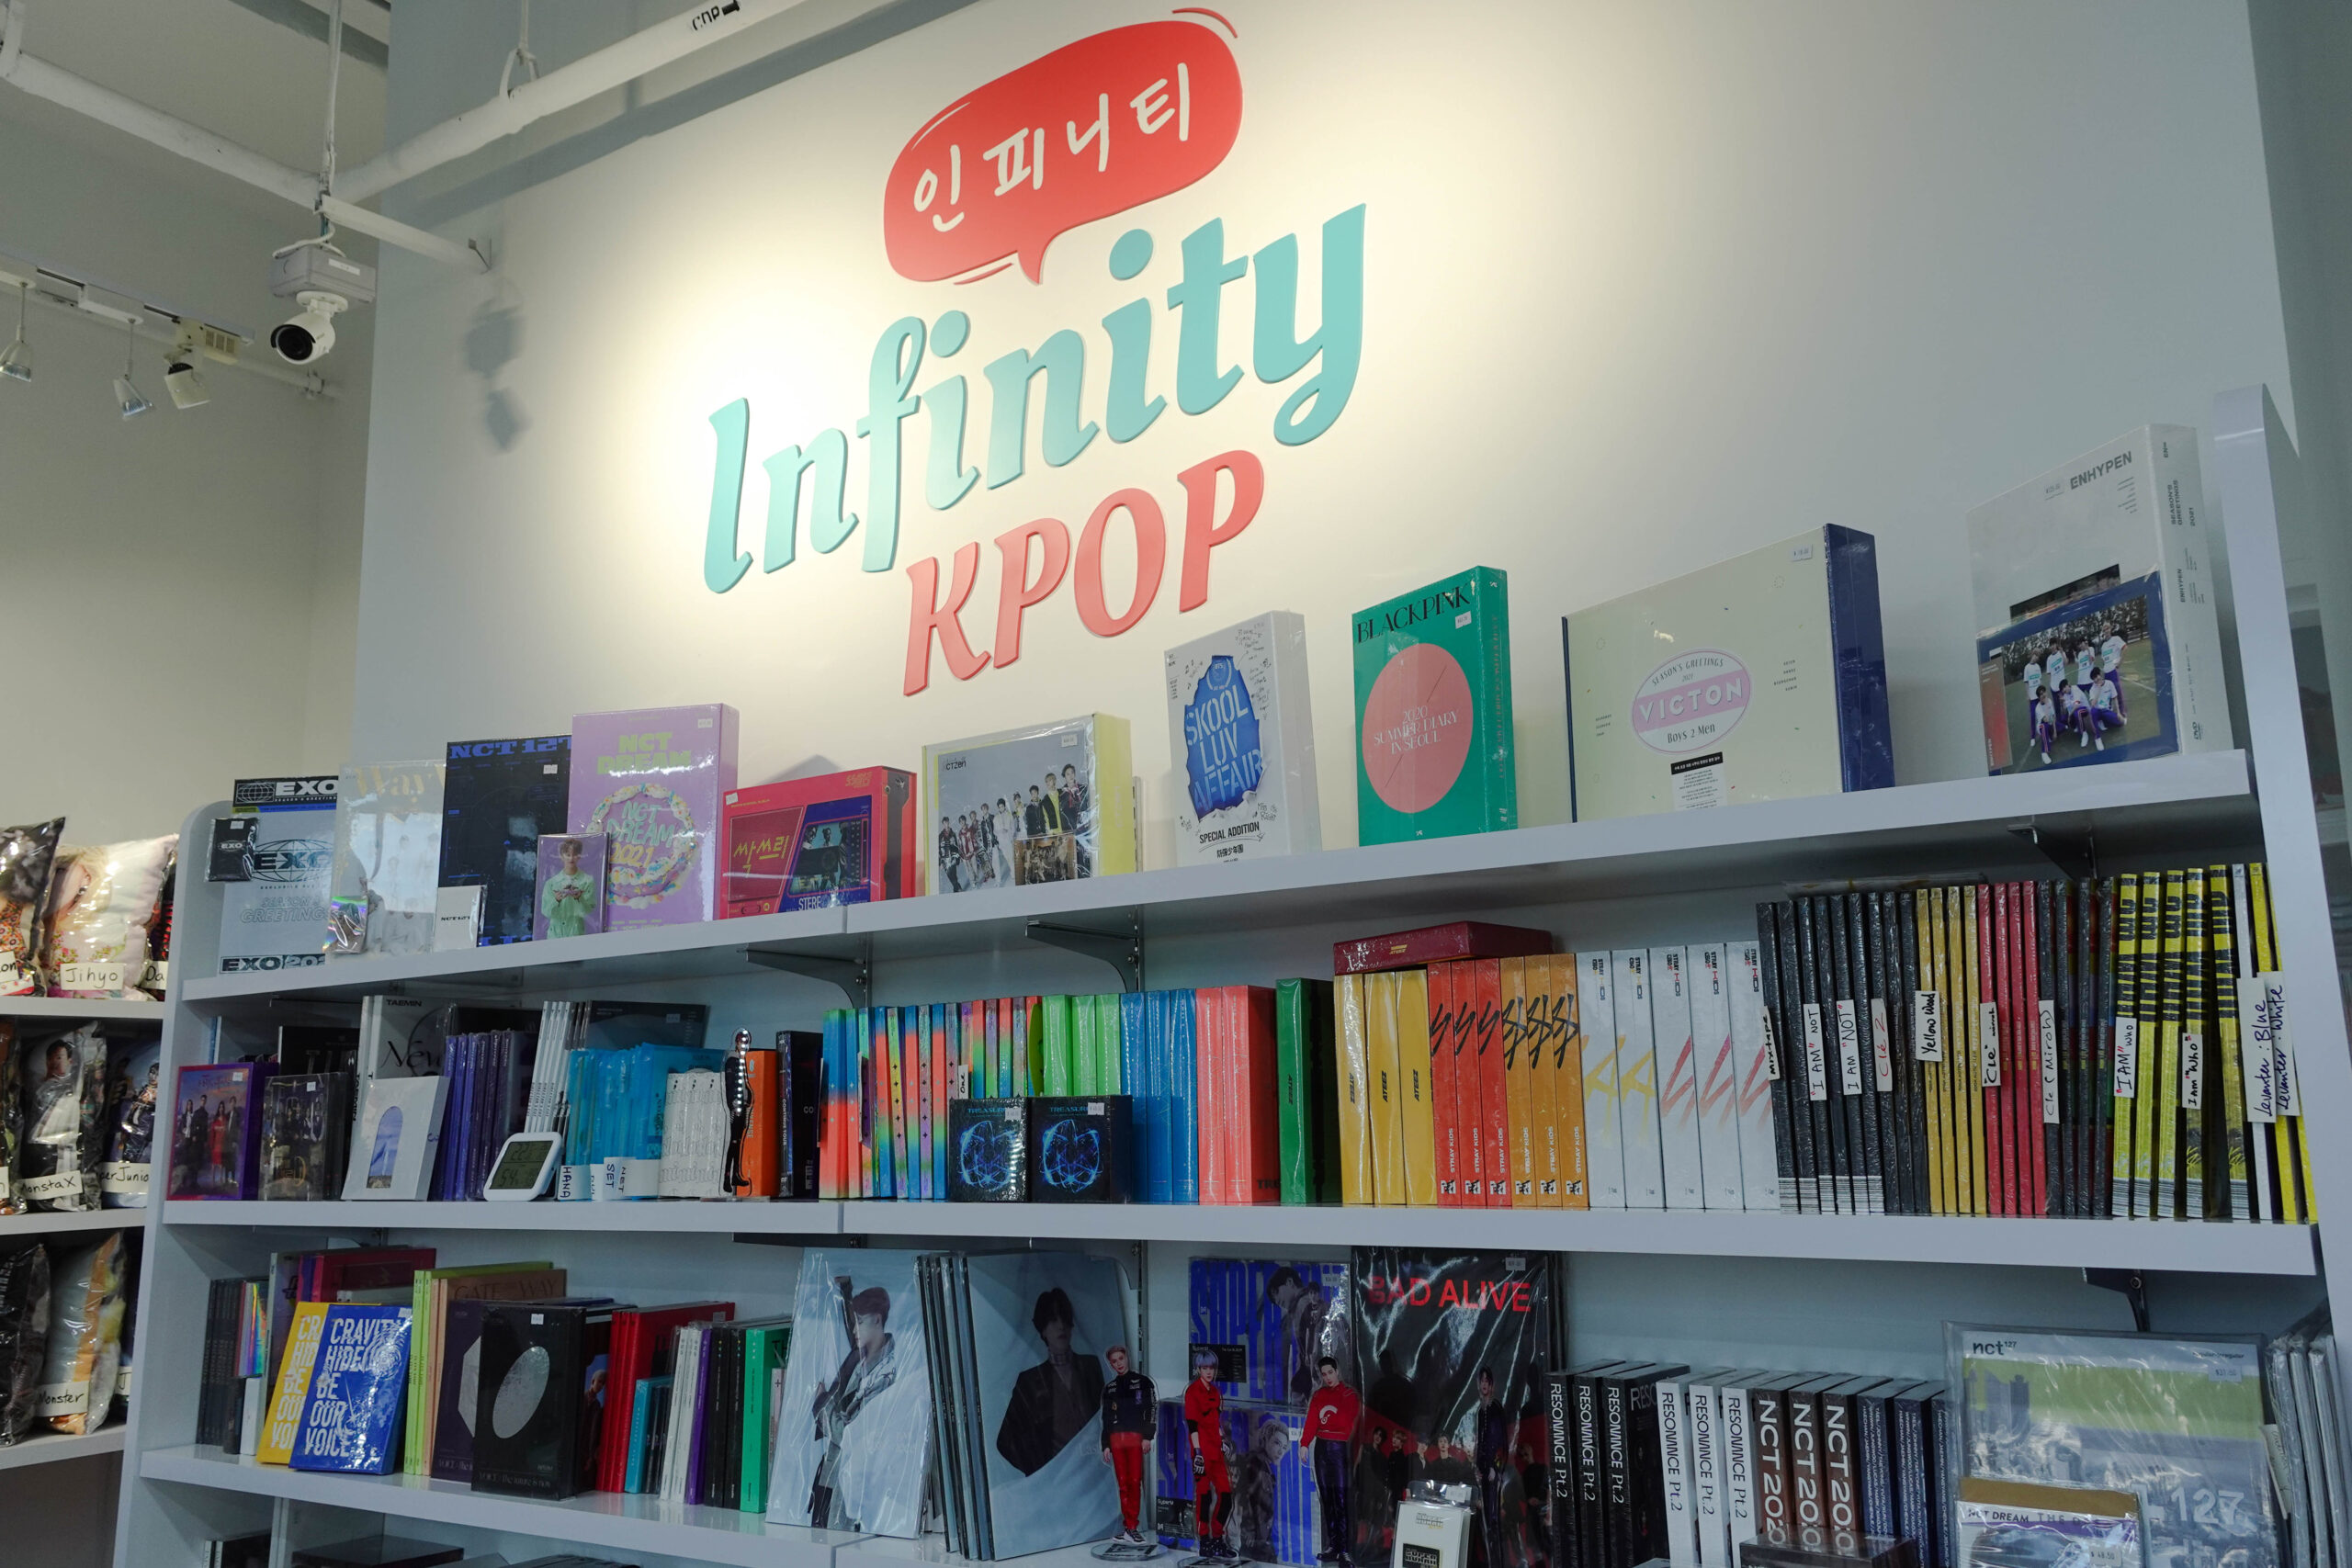 A dedicated shop for K-Pop Albums & Merchandise in Singapore – Infinity KPOP